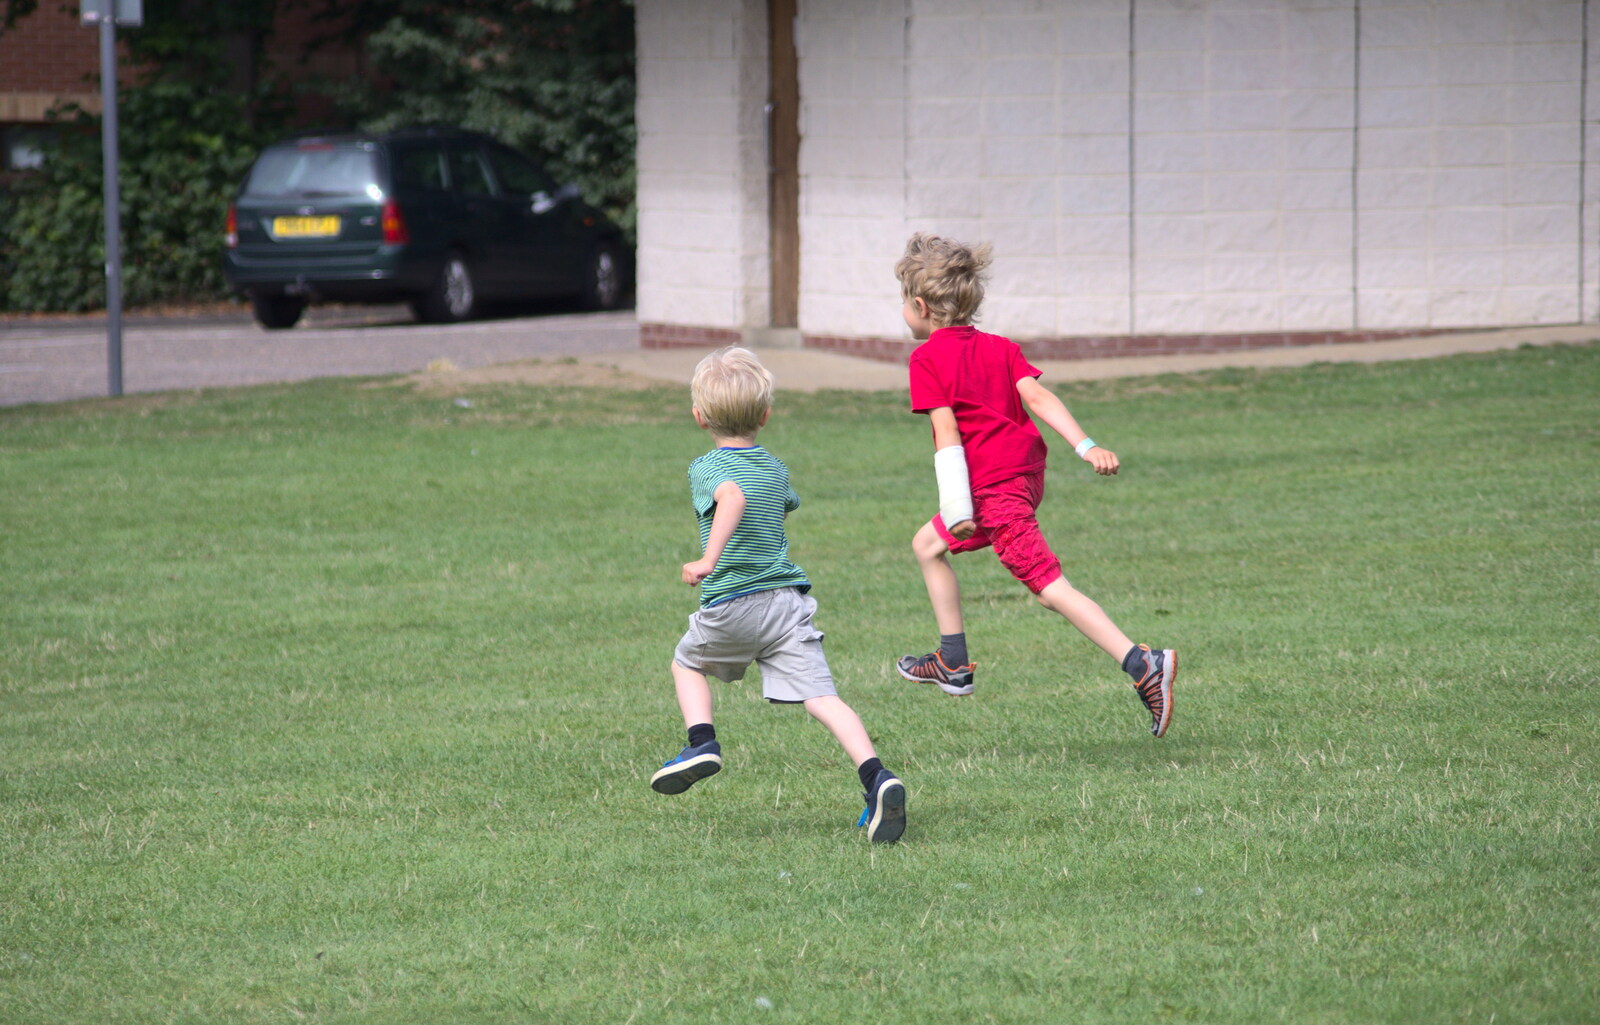 Fred's in the air from A Race For Life, The Park, Diss, Norfolk - 16th August 2015